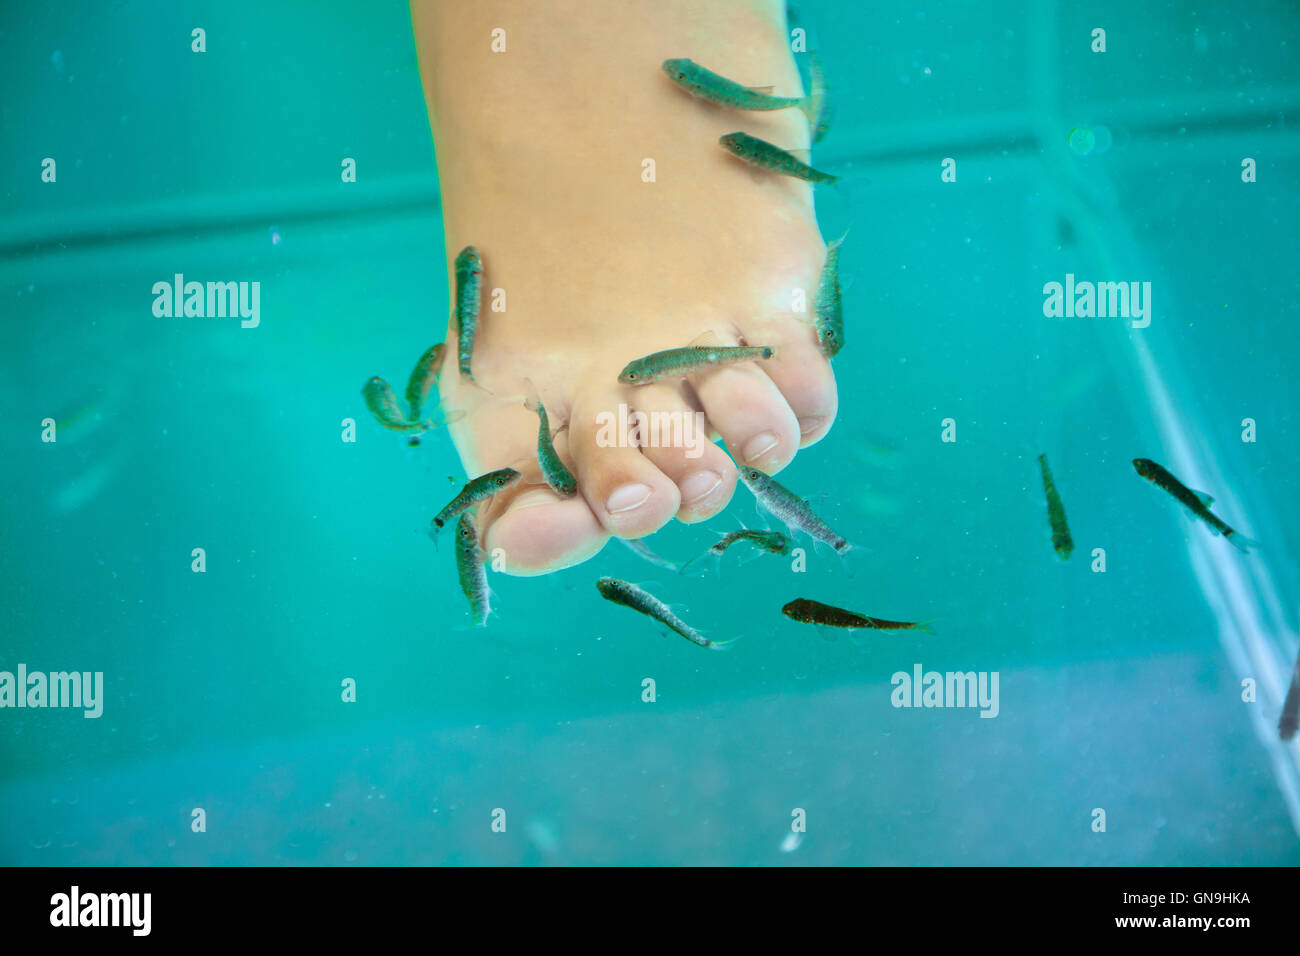 Fish Pedicure Banned In Florida | Health Concerns Raised